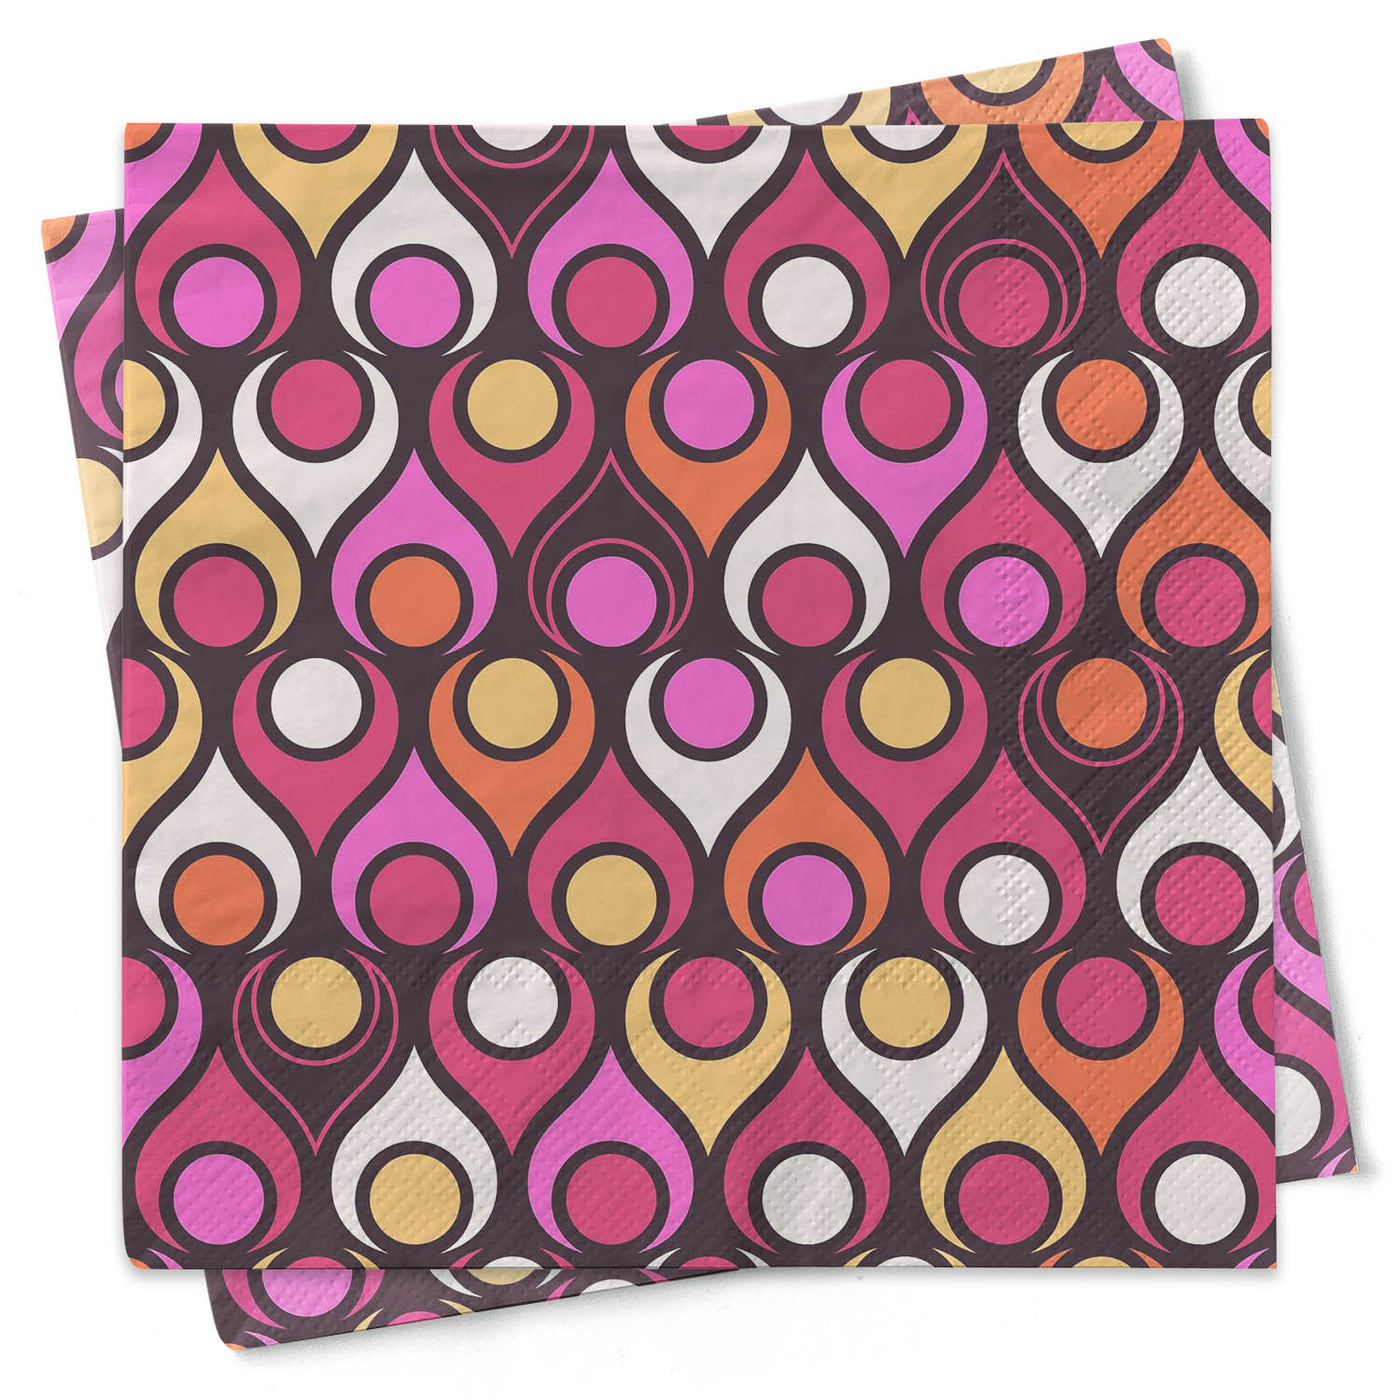 This Mid Century Modern geometric design cocktail beverage napkin will be a great add-on to any bar or cocktail party. Great for hosting dinner parties, cocktail parties, girls night out, give a gift for a host/hostess,  Birthday gifts, or even a Happy housewarming! The deep jewel color way makes a bold statement on any bar.